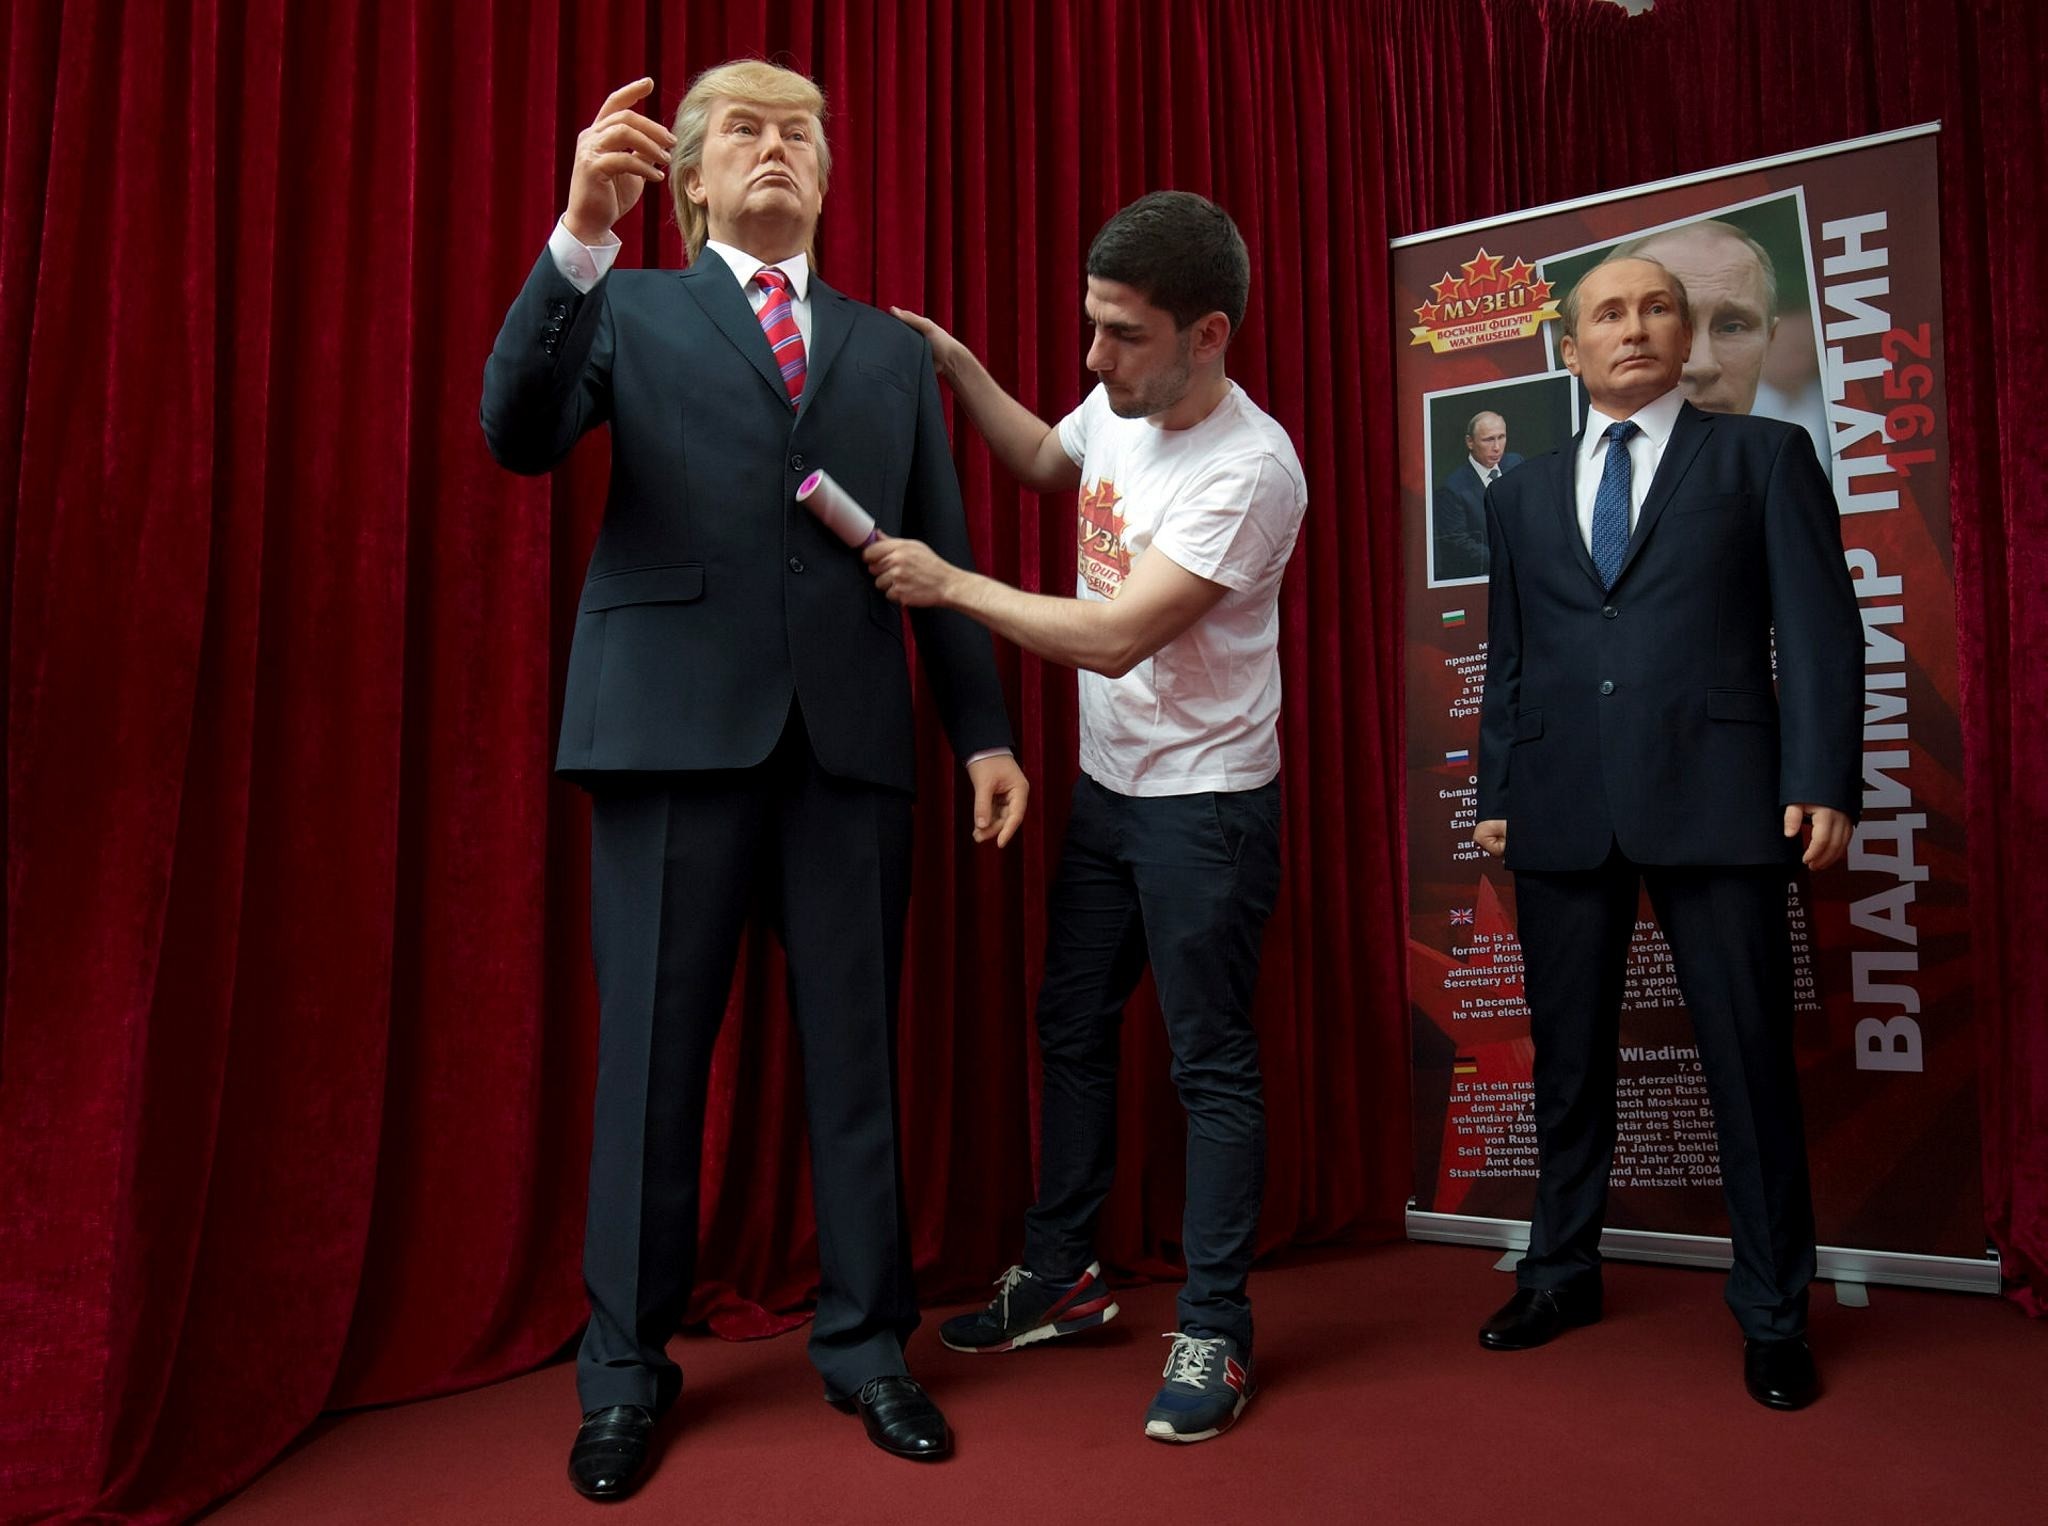 The wax models of US President Donald Trump, left, and Russian President Vladimir Putin, right, are displayed in Sofia, Friday March 31, 2017. (AP Photo)